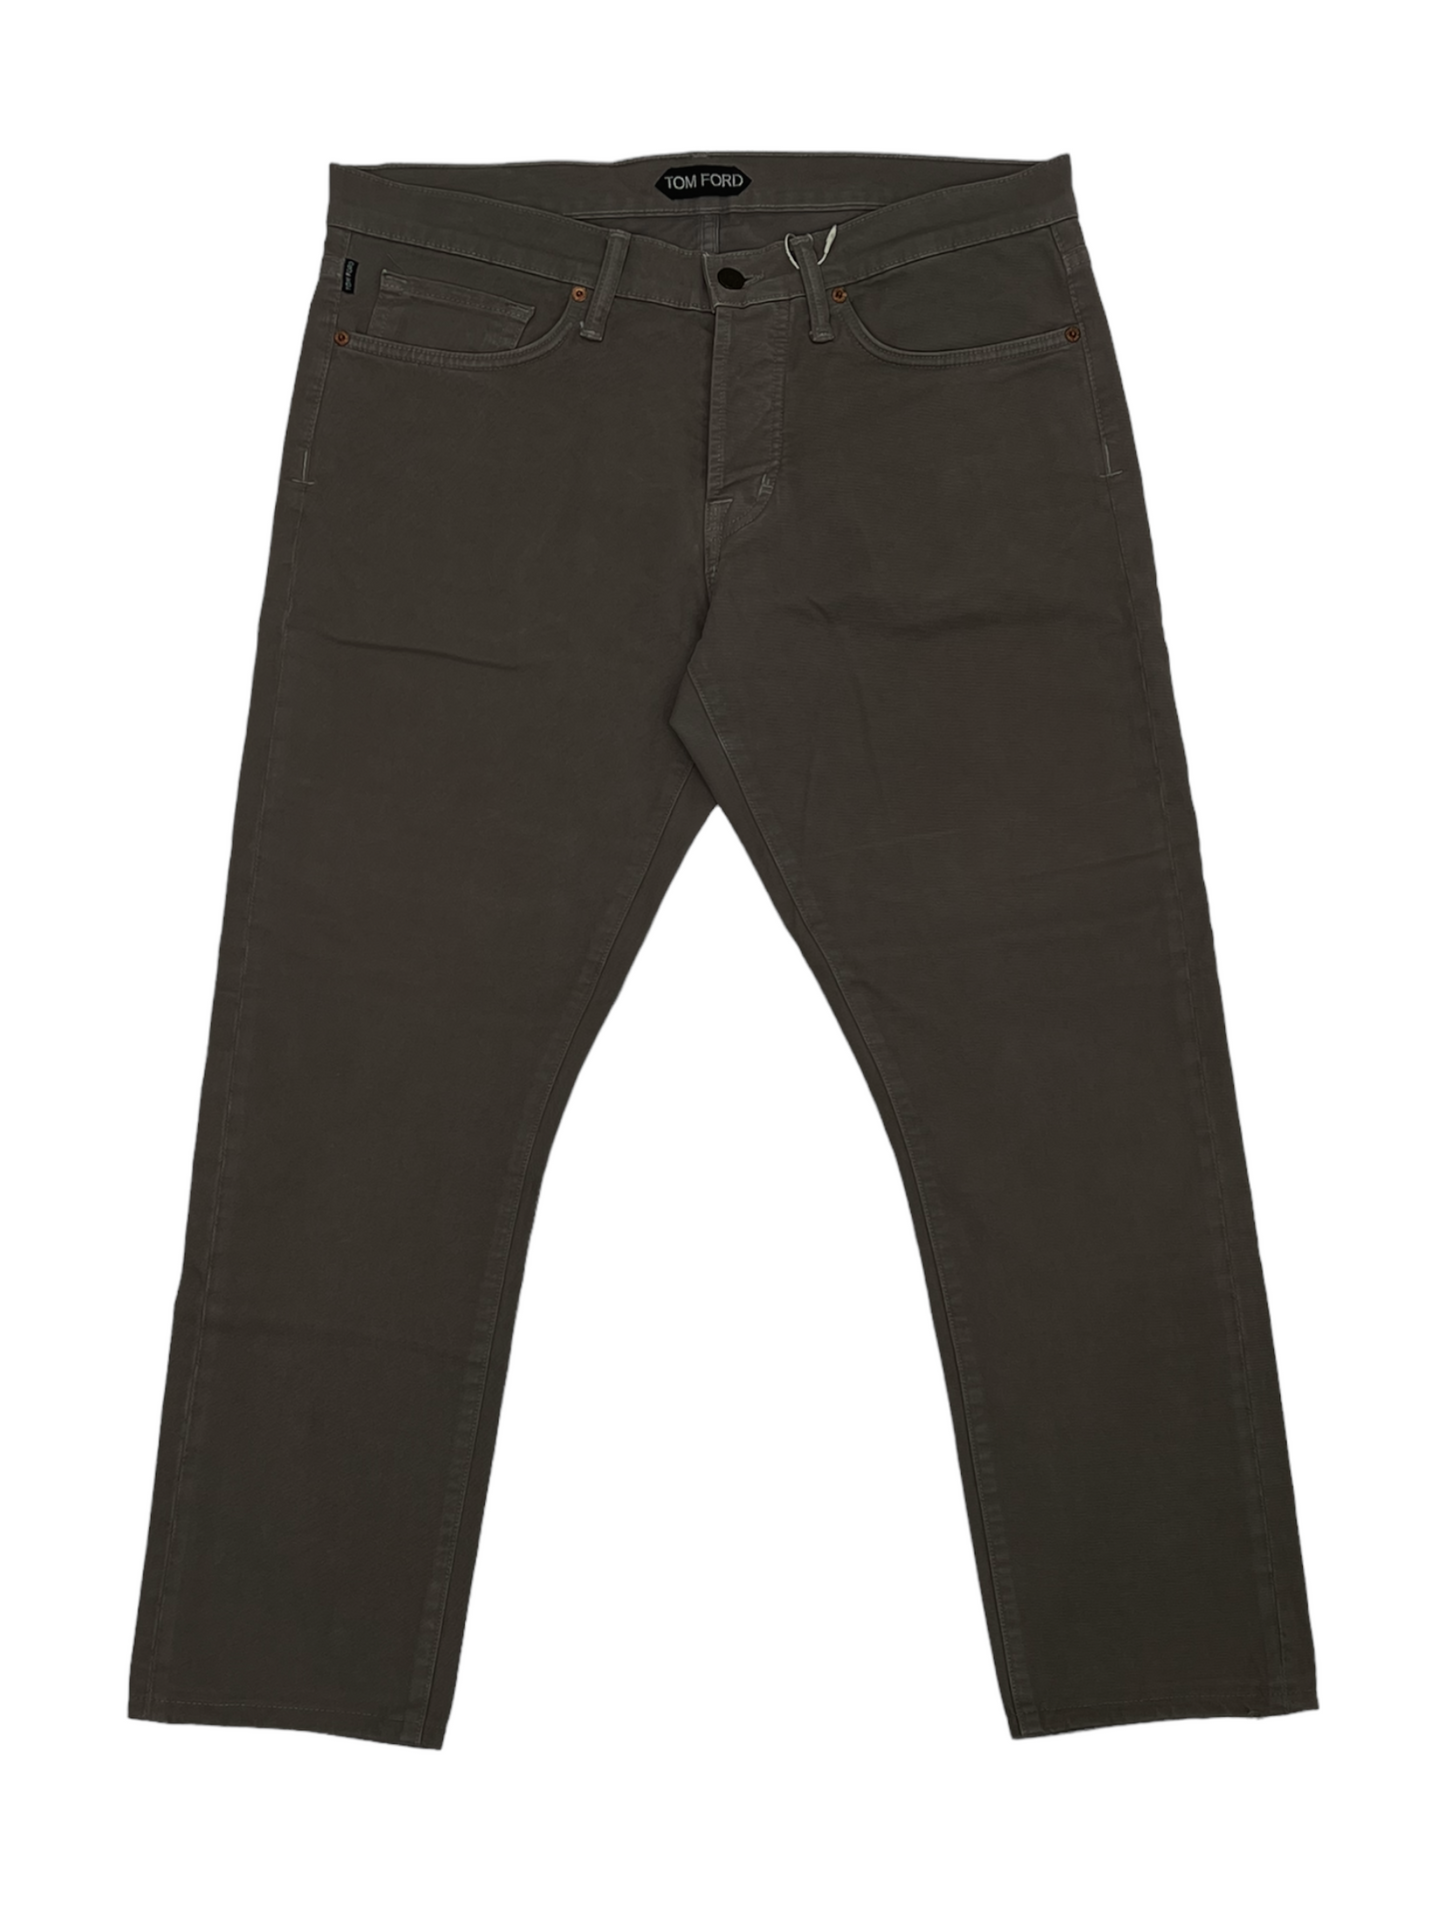 Tom Ford Charcoal Casual Pants 33W